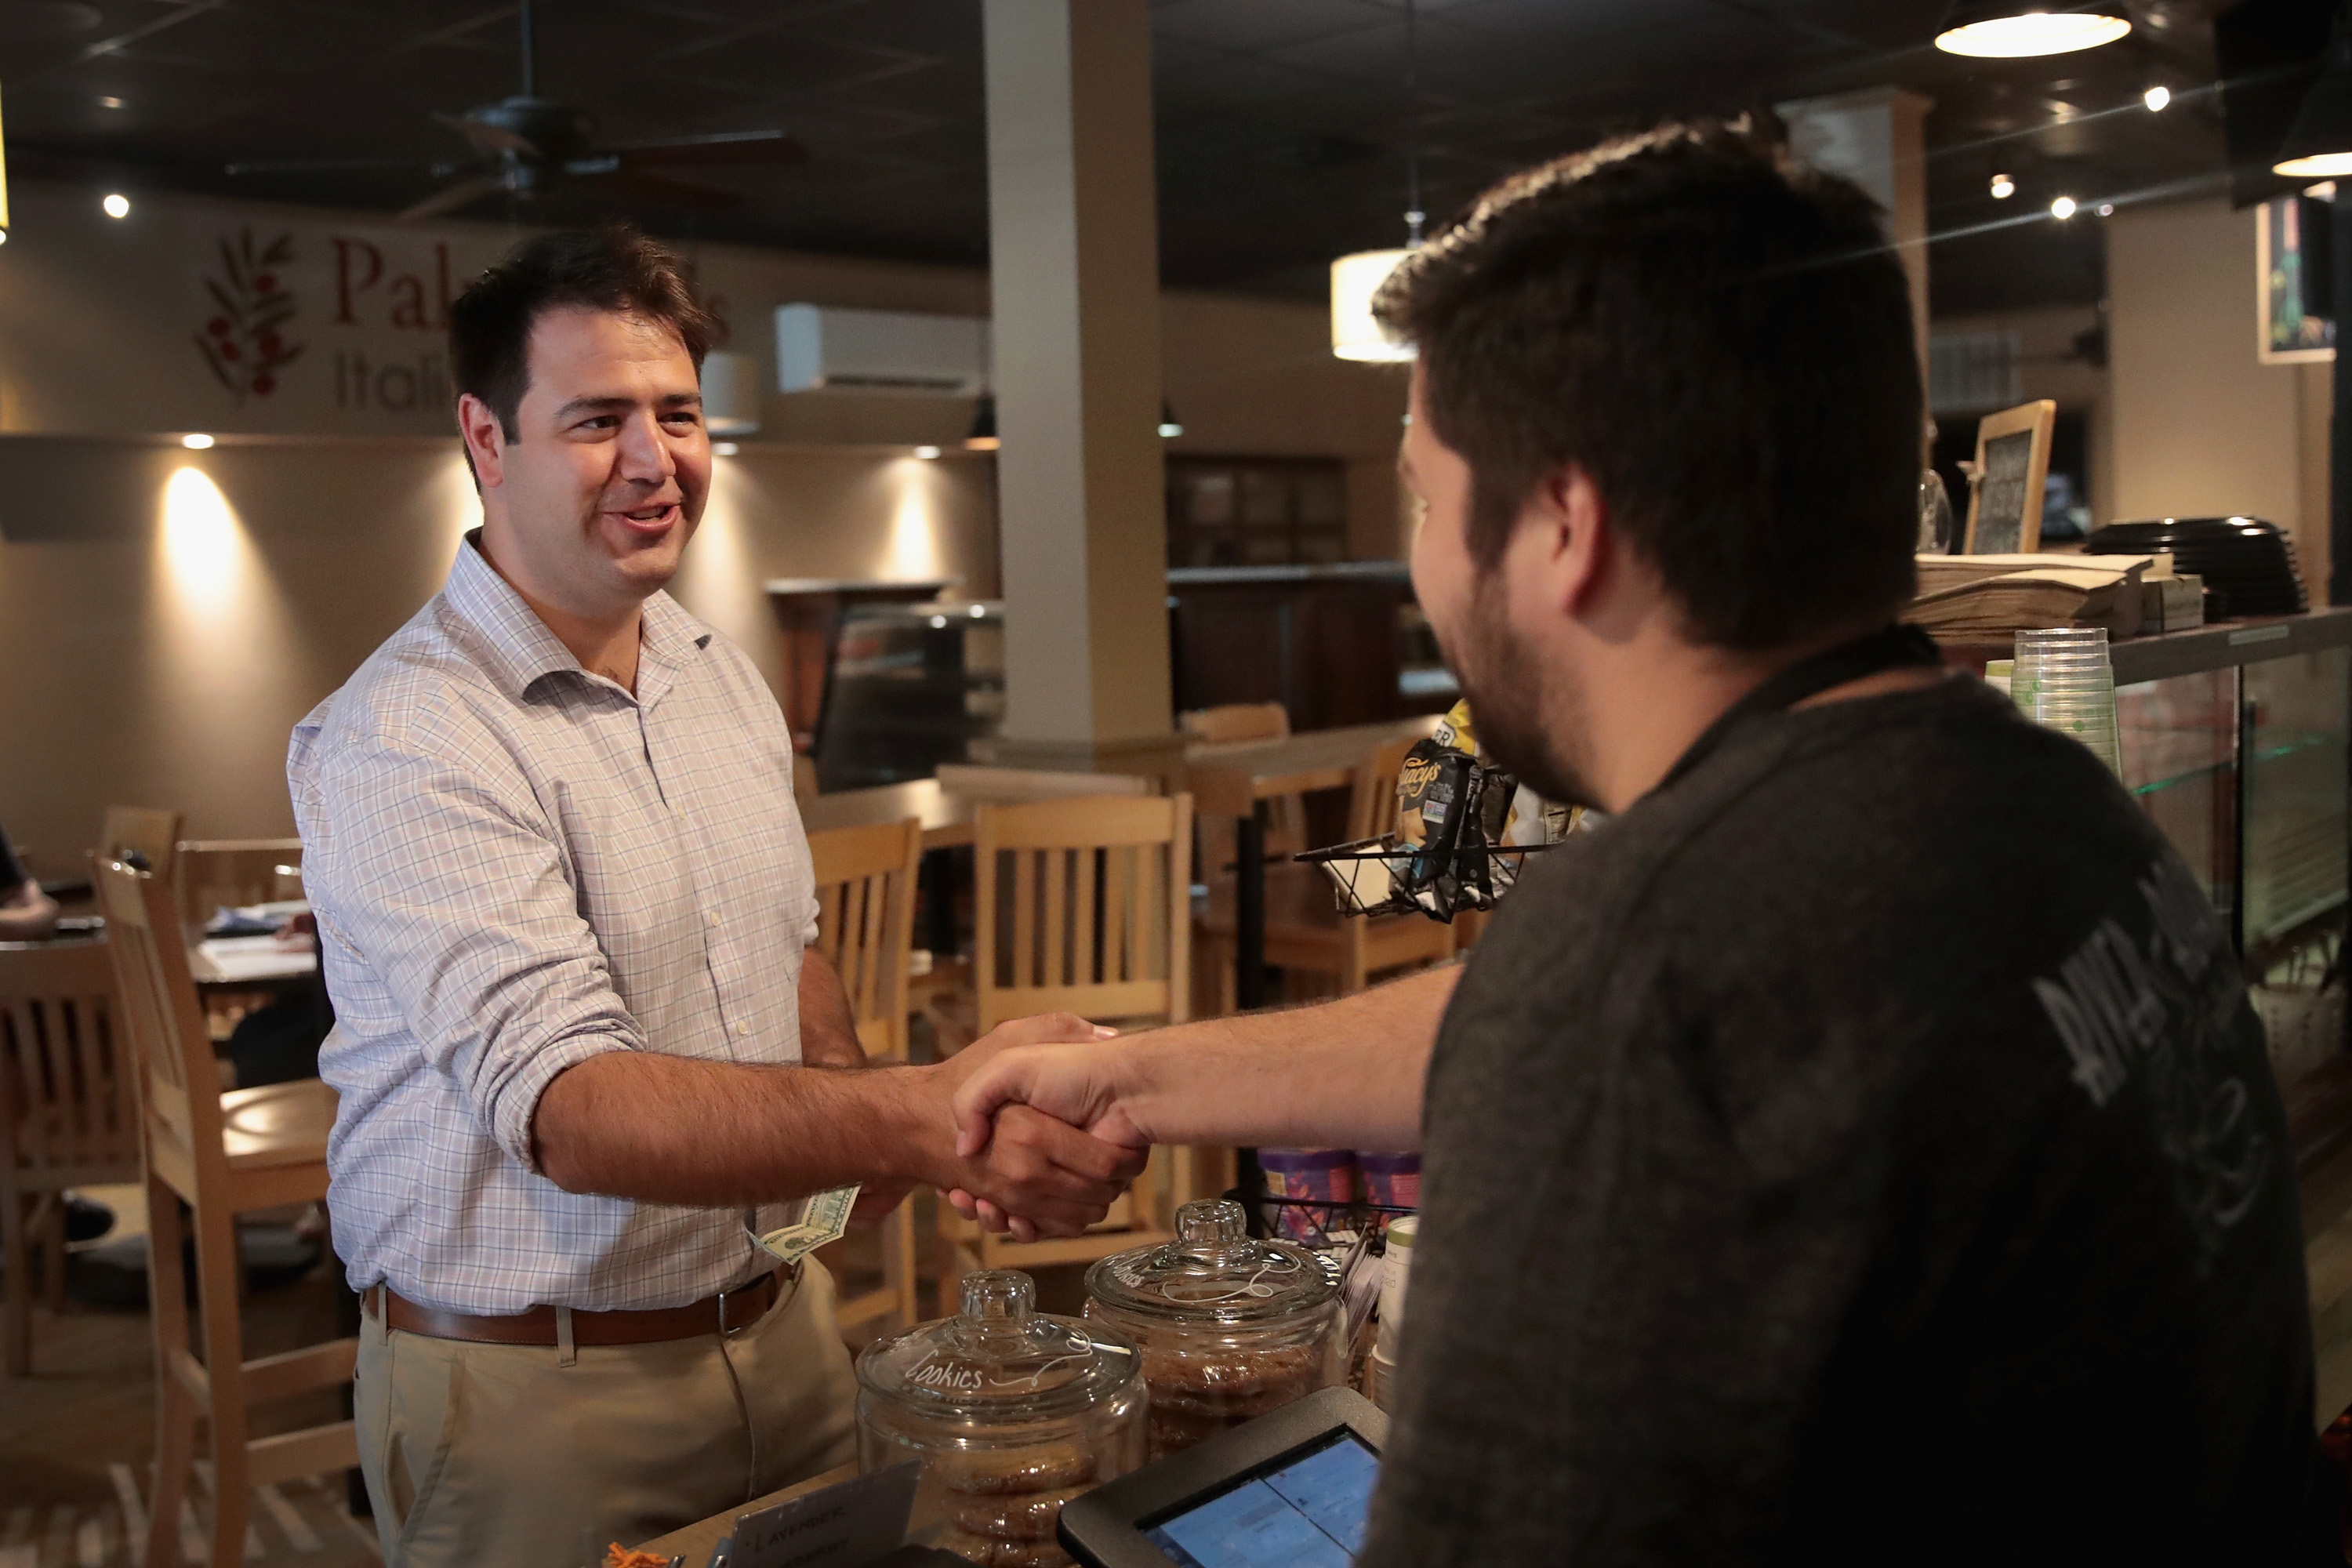 Ohio Democratic congressional candidate Danny O'Connor visits the River Road Coffeehouse while campaigning on August 6, 2018 in Newark, Ohio. O'Connor is in a dead heat race against Republican challenger Troy Balderson for tomorrow's special election in Ohio's 12th Congressional District. (Scott Olson&mdash;Getty Images)